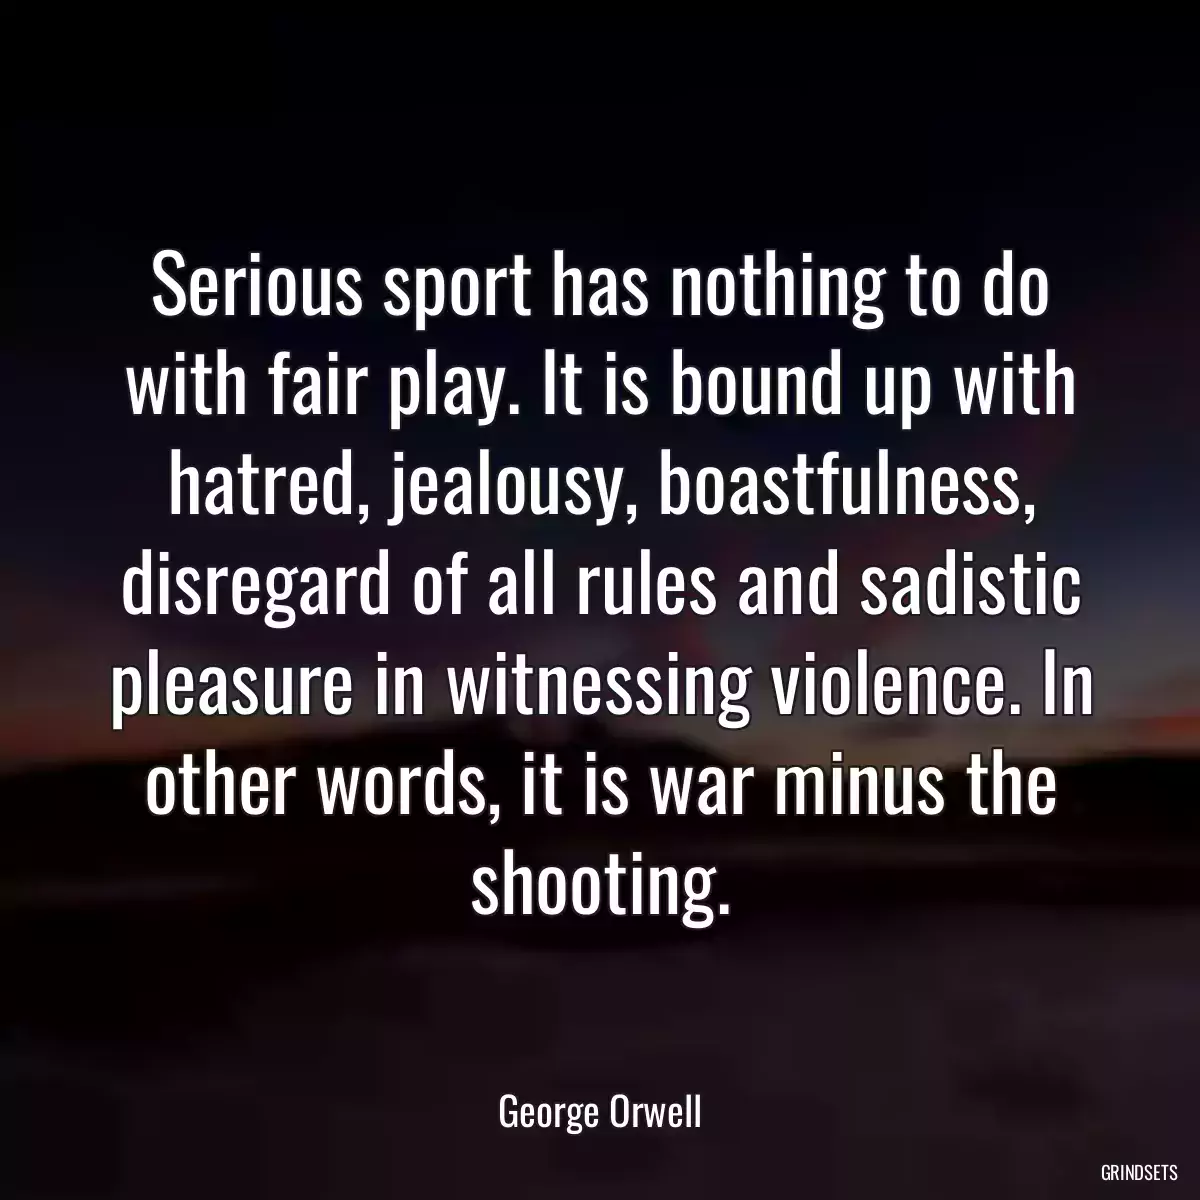 Serious sport has nothing to do with fair play. It is bound up with hatred, jealousy, boastfulness, disregard of all rules and sadistic pleasure in witnessing violence. In other words, it is war minus the shooting.